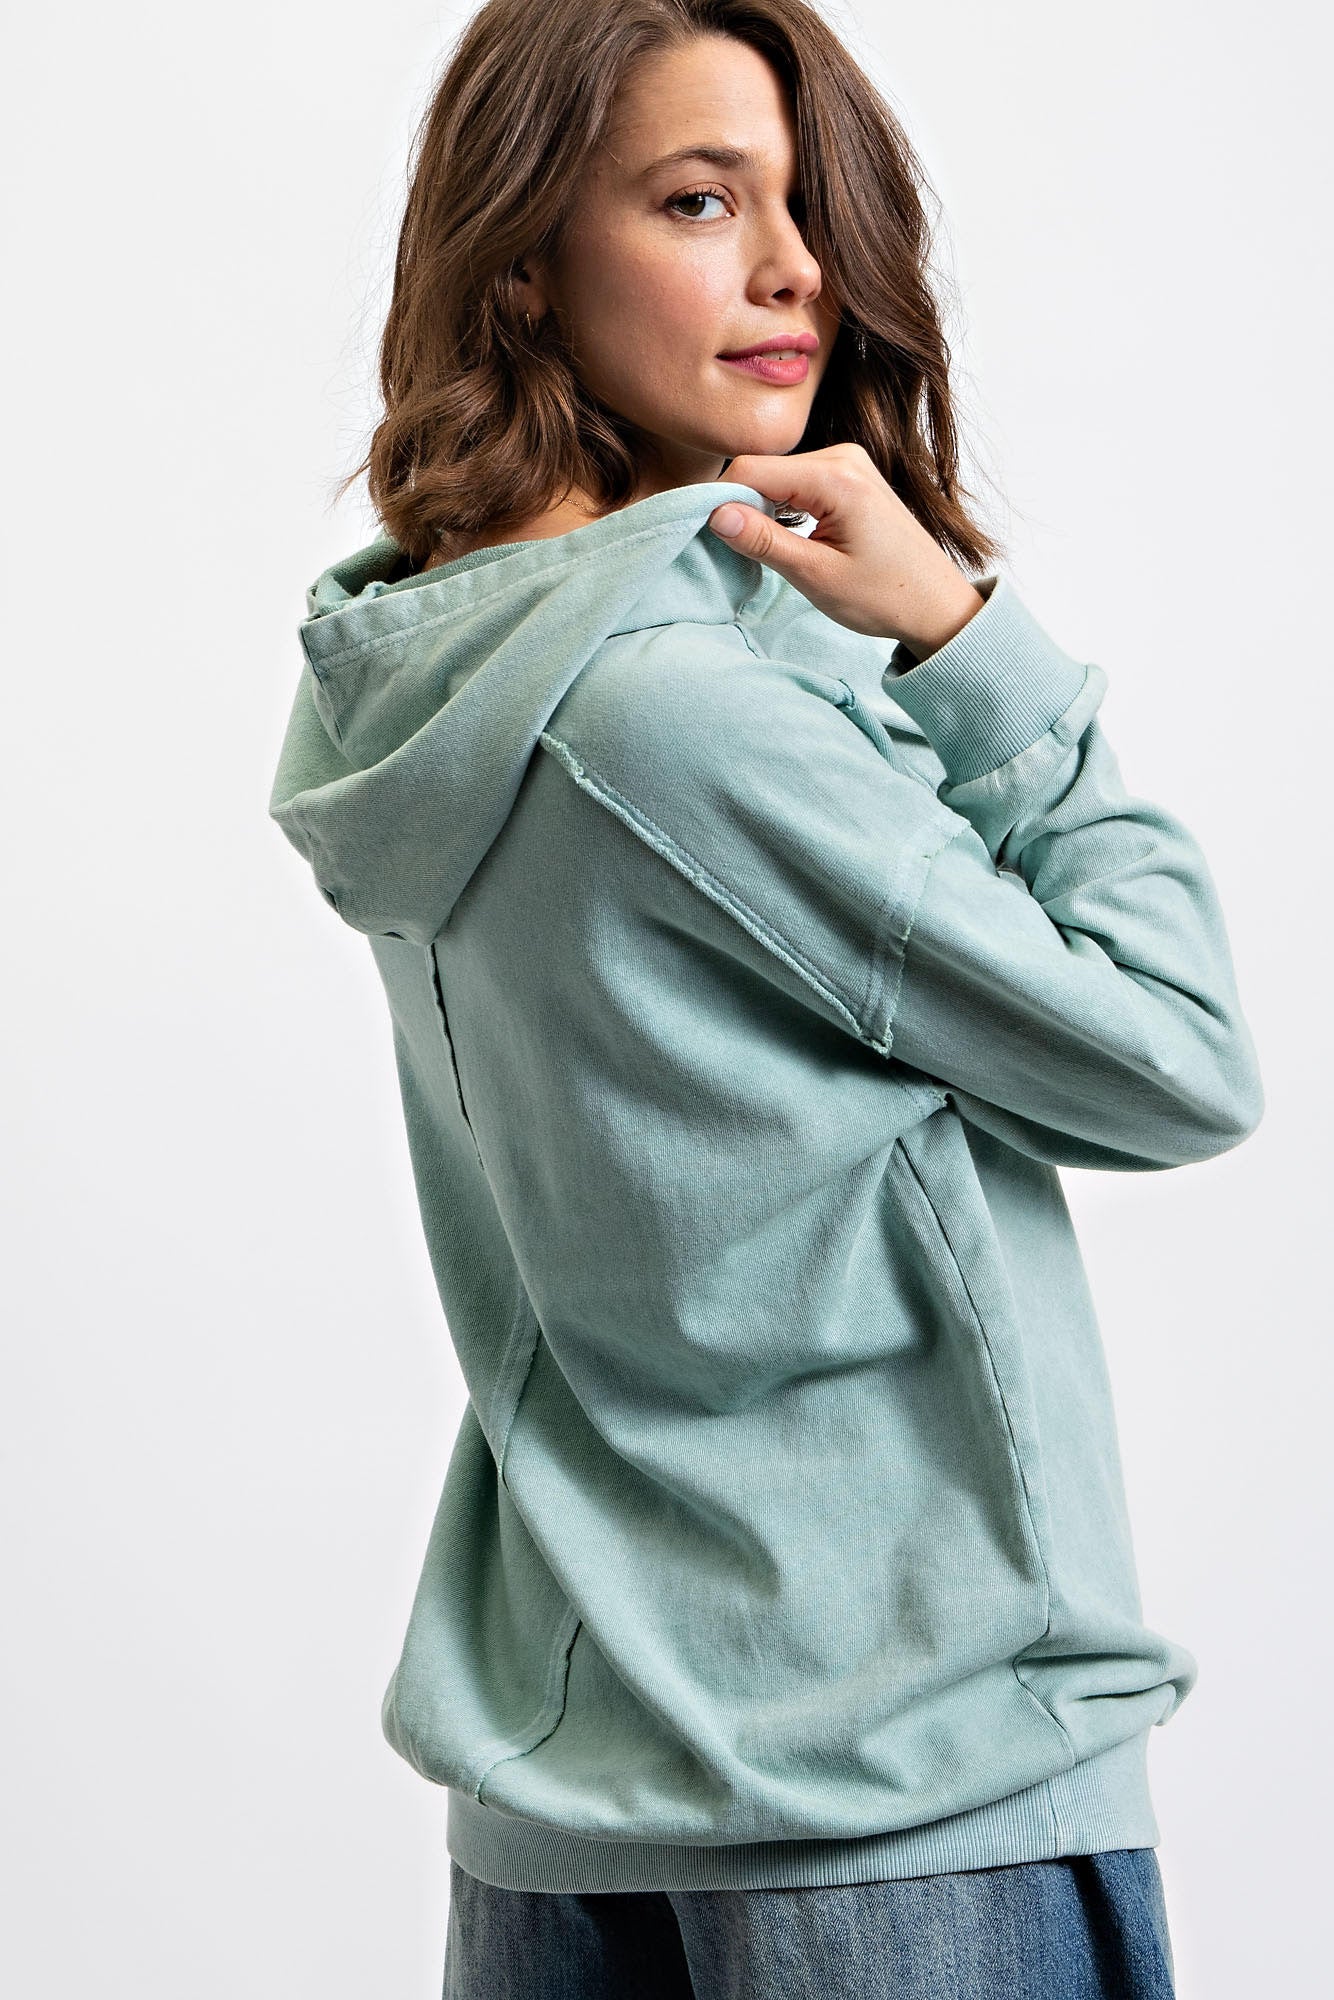 Natalie Peace Sign Mineral Washed Hoodie in Seafoam